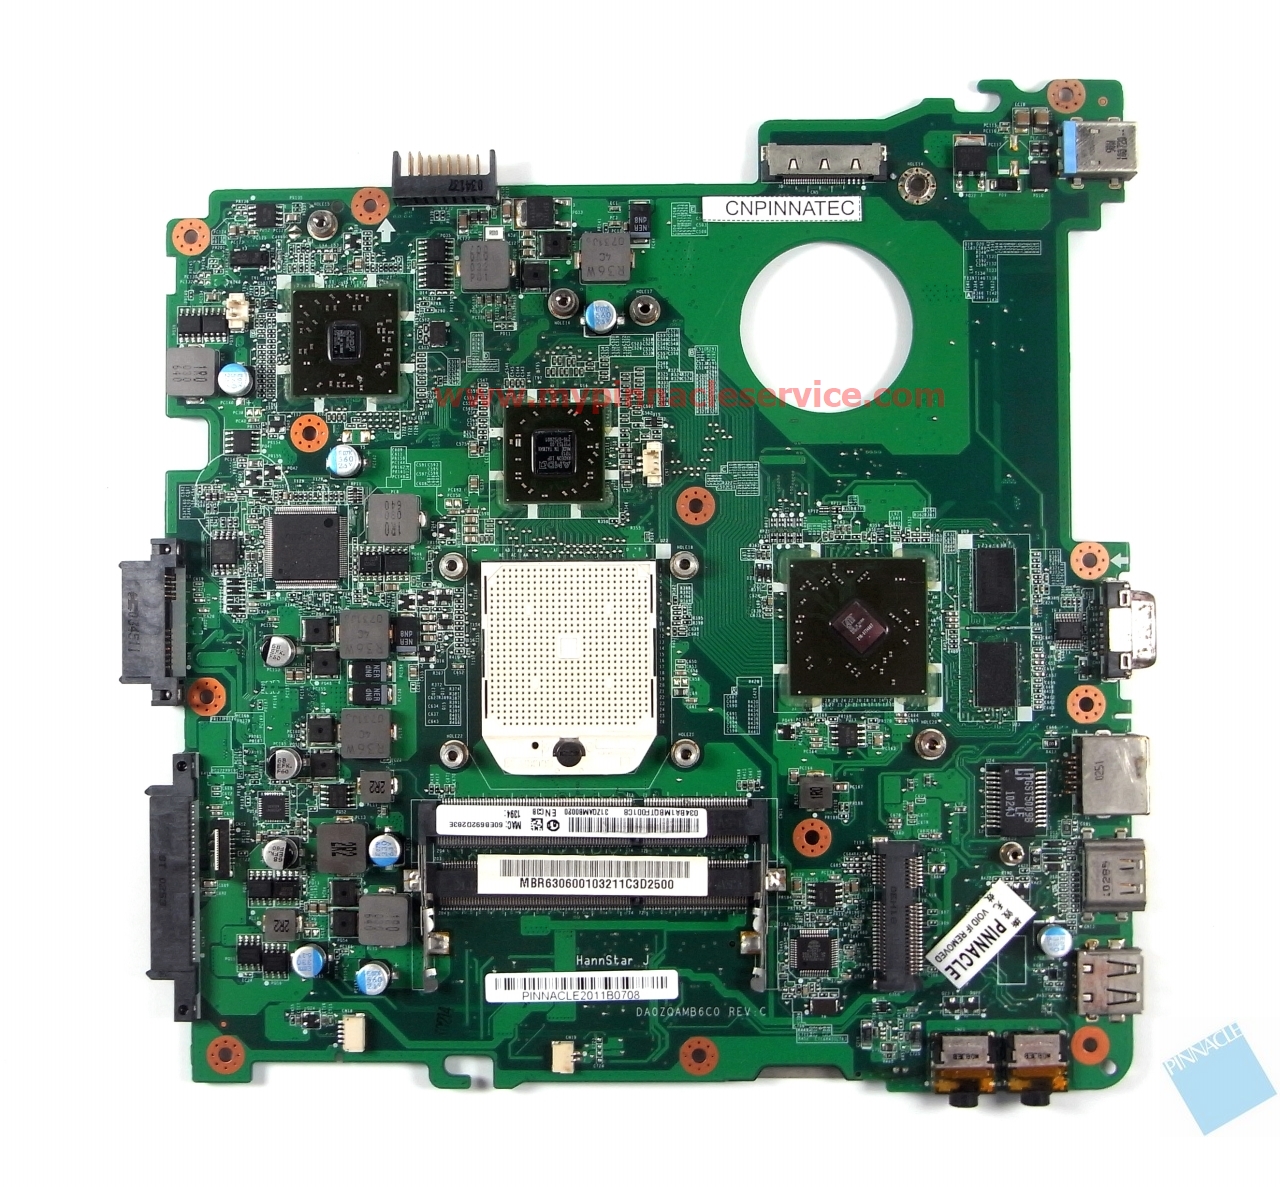 mbrp636001-motherboard-for-acer-aspire-4552-4552g-da0zqamb6c0-31zqamb0020-rimg0017.jpg